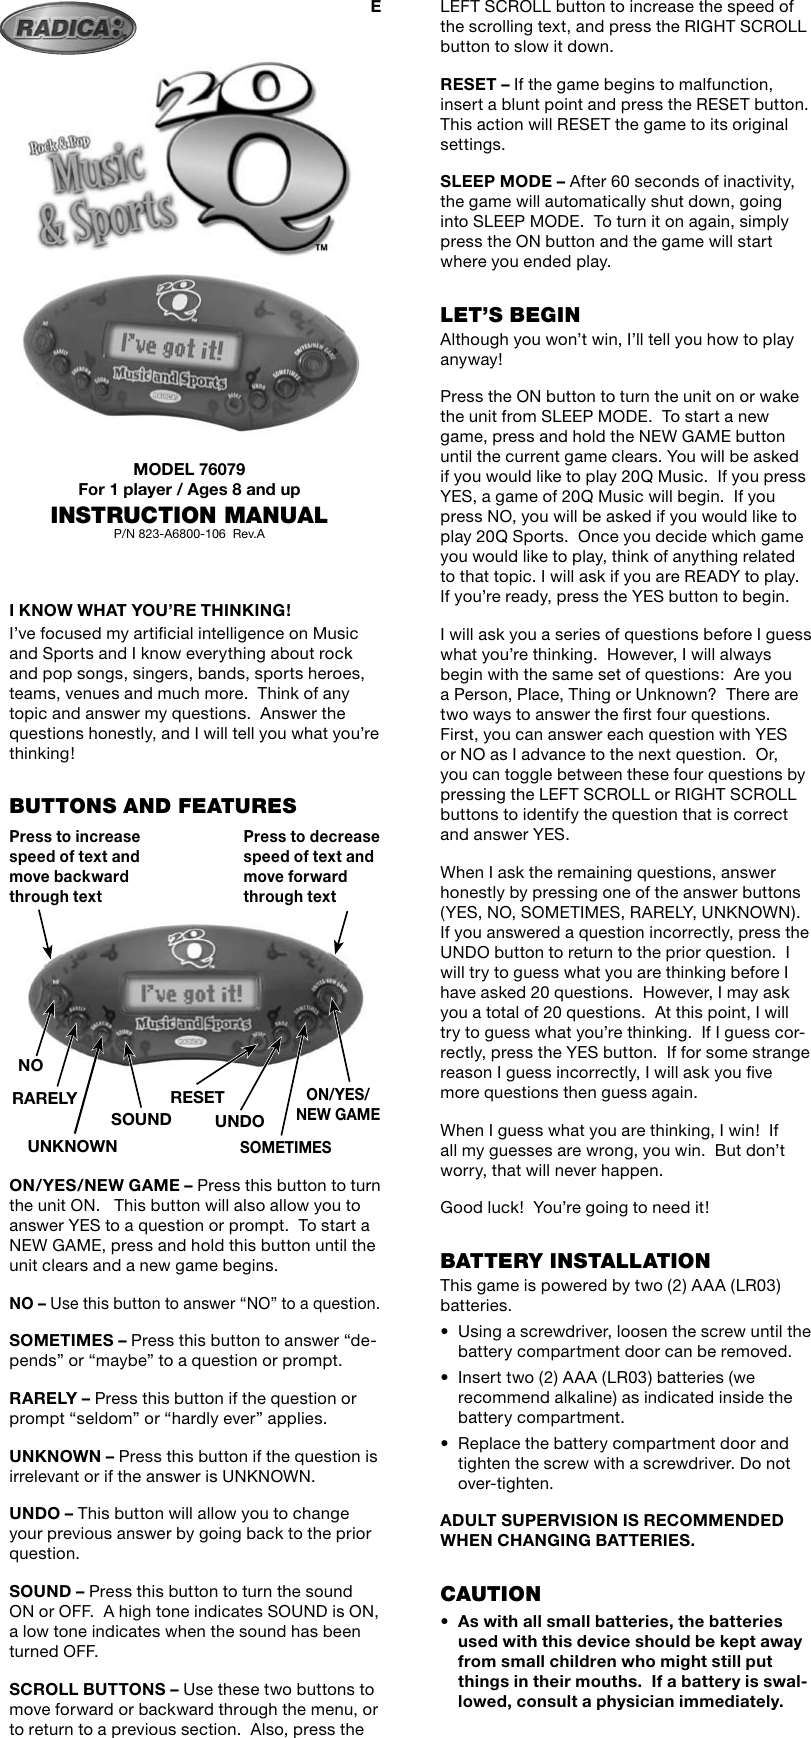 Page 1 of 2 - Radica-Games Radica-Games-20Q-76079-Users-Manual-  Radica-games-20q-76079-users-manual